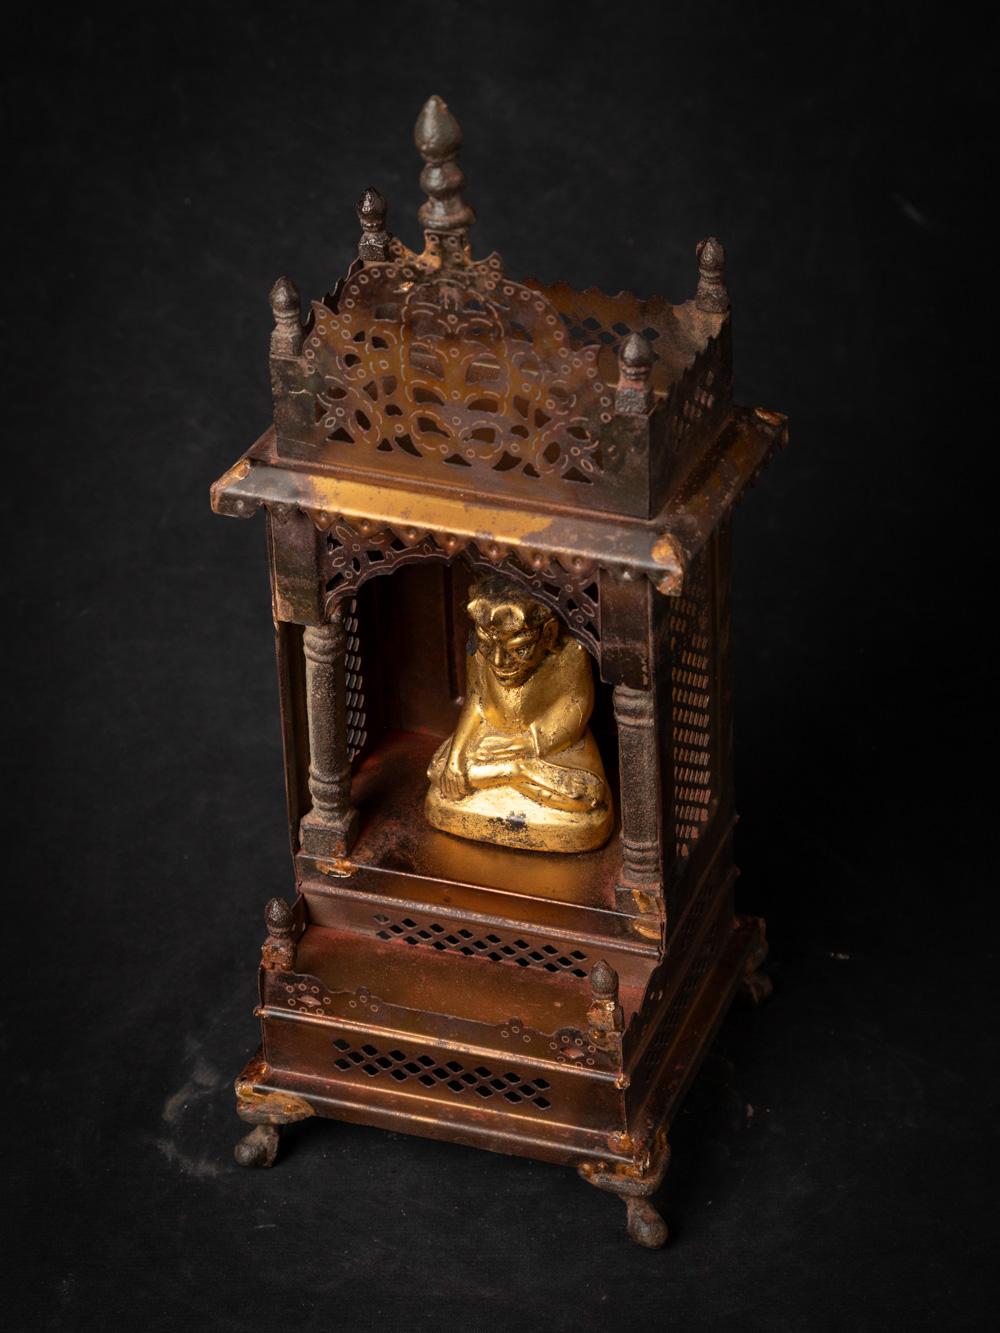 Old metal temple with antique wooden Buddha statue
Material: Metal
36,8 cm high
15 cm wide and 14,7 cm deep
The temple is originating from Nepal
The gilded Buddha is from Burma and is dating from the 19th century
Weight: 1,2 kgs
Originating from